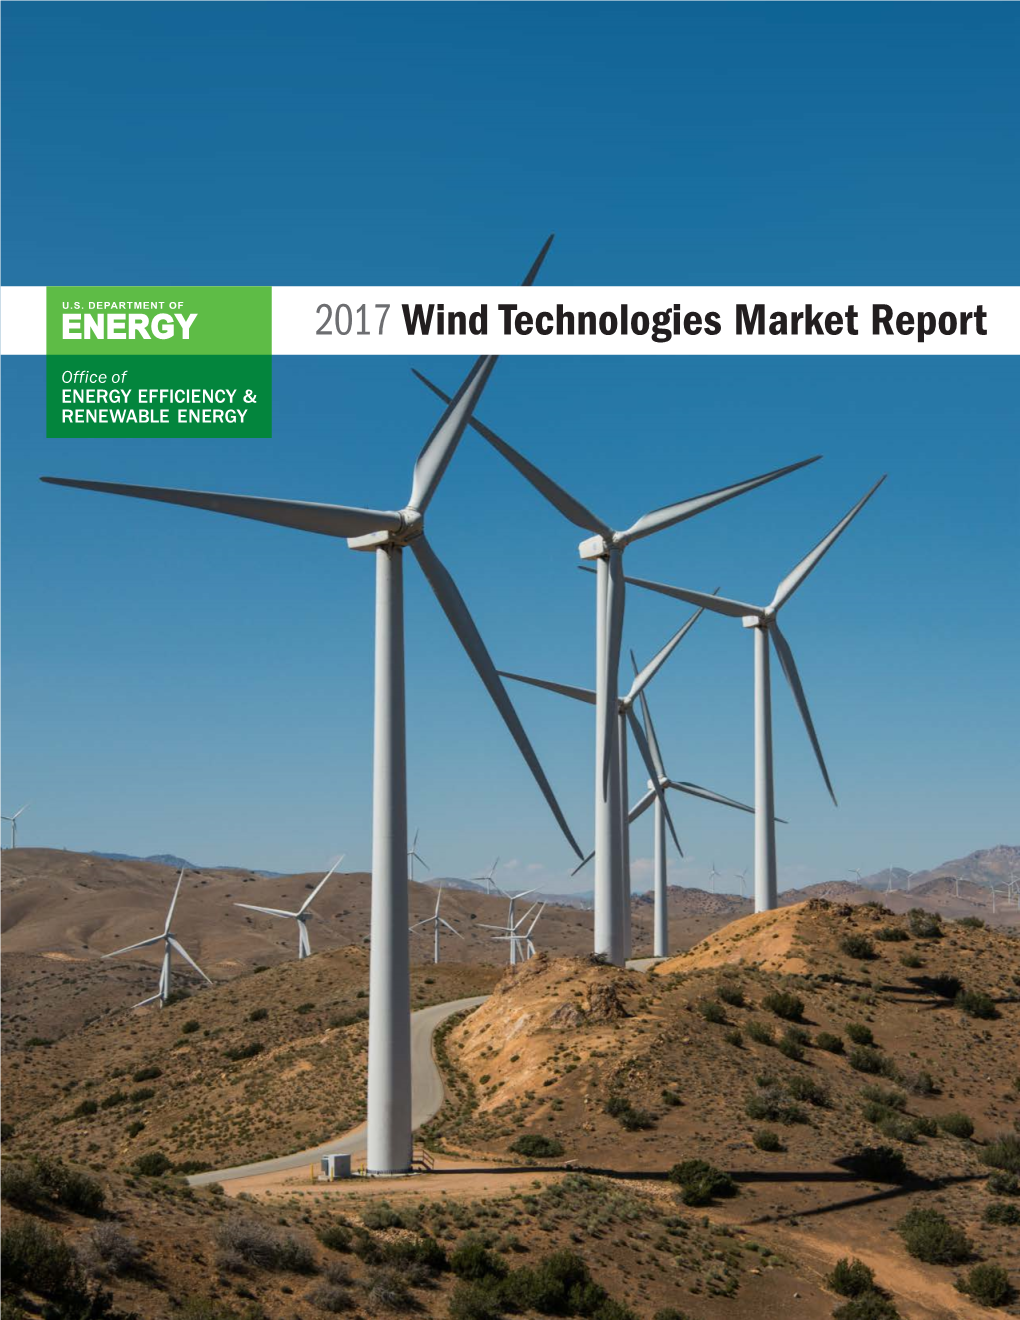 2017 Wind Technologies Market Report This Report Is Being Disseminated by the U.S